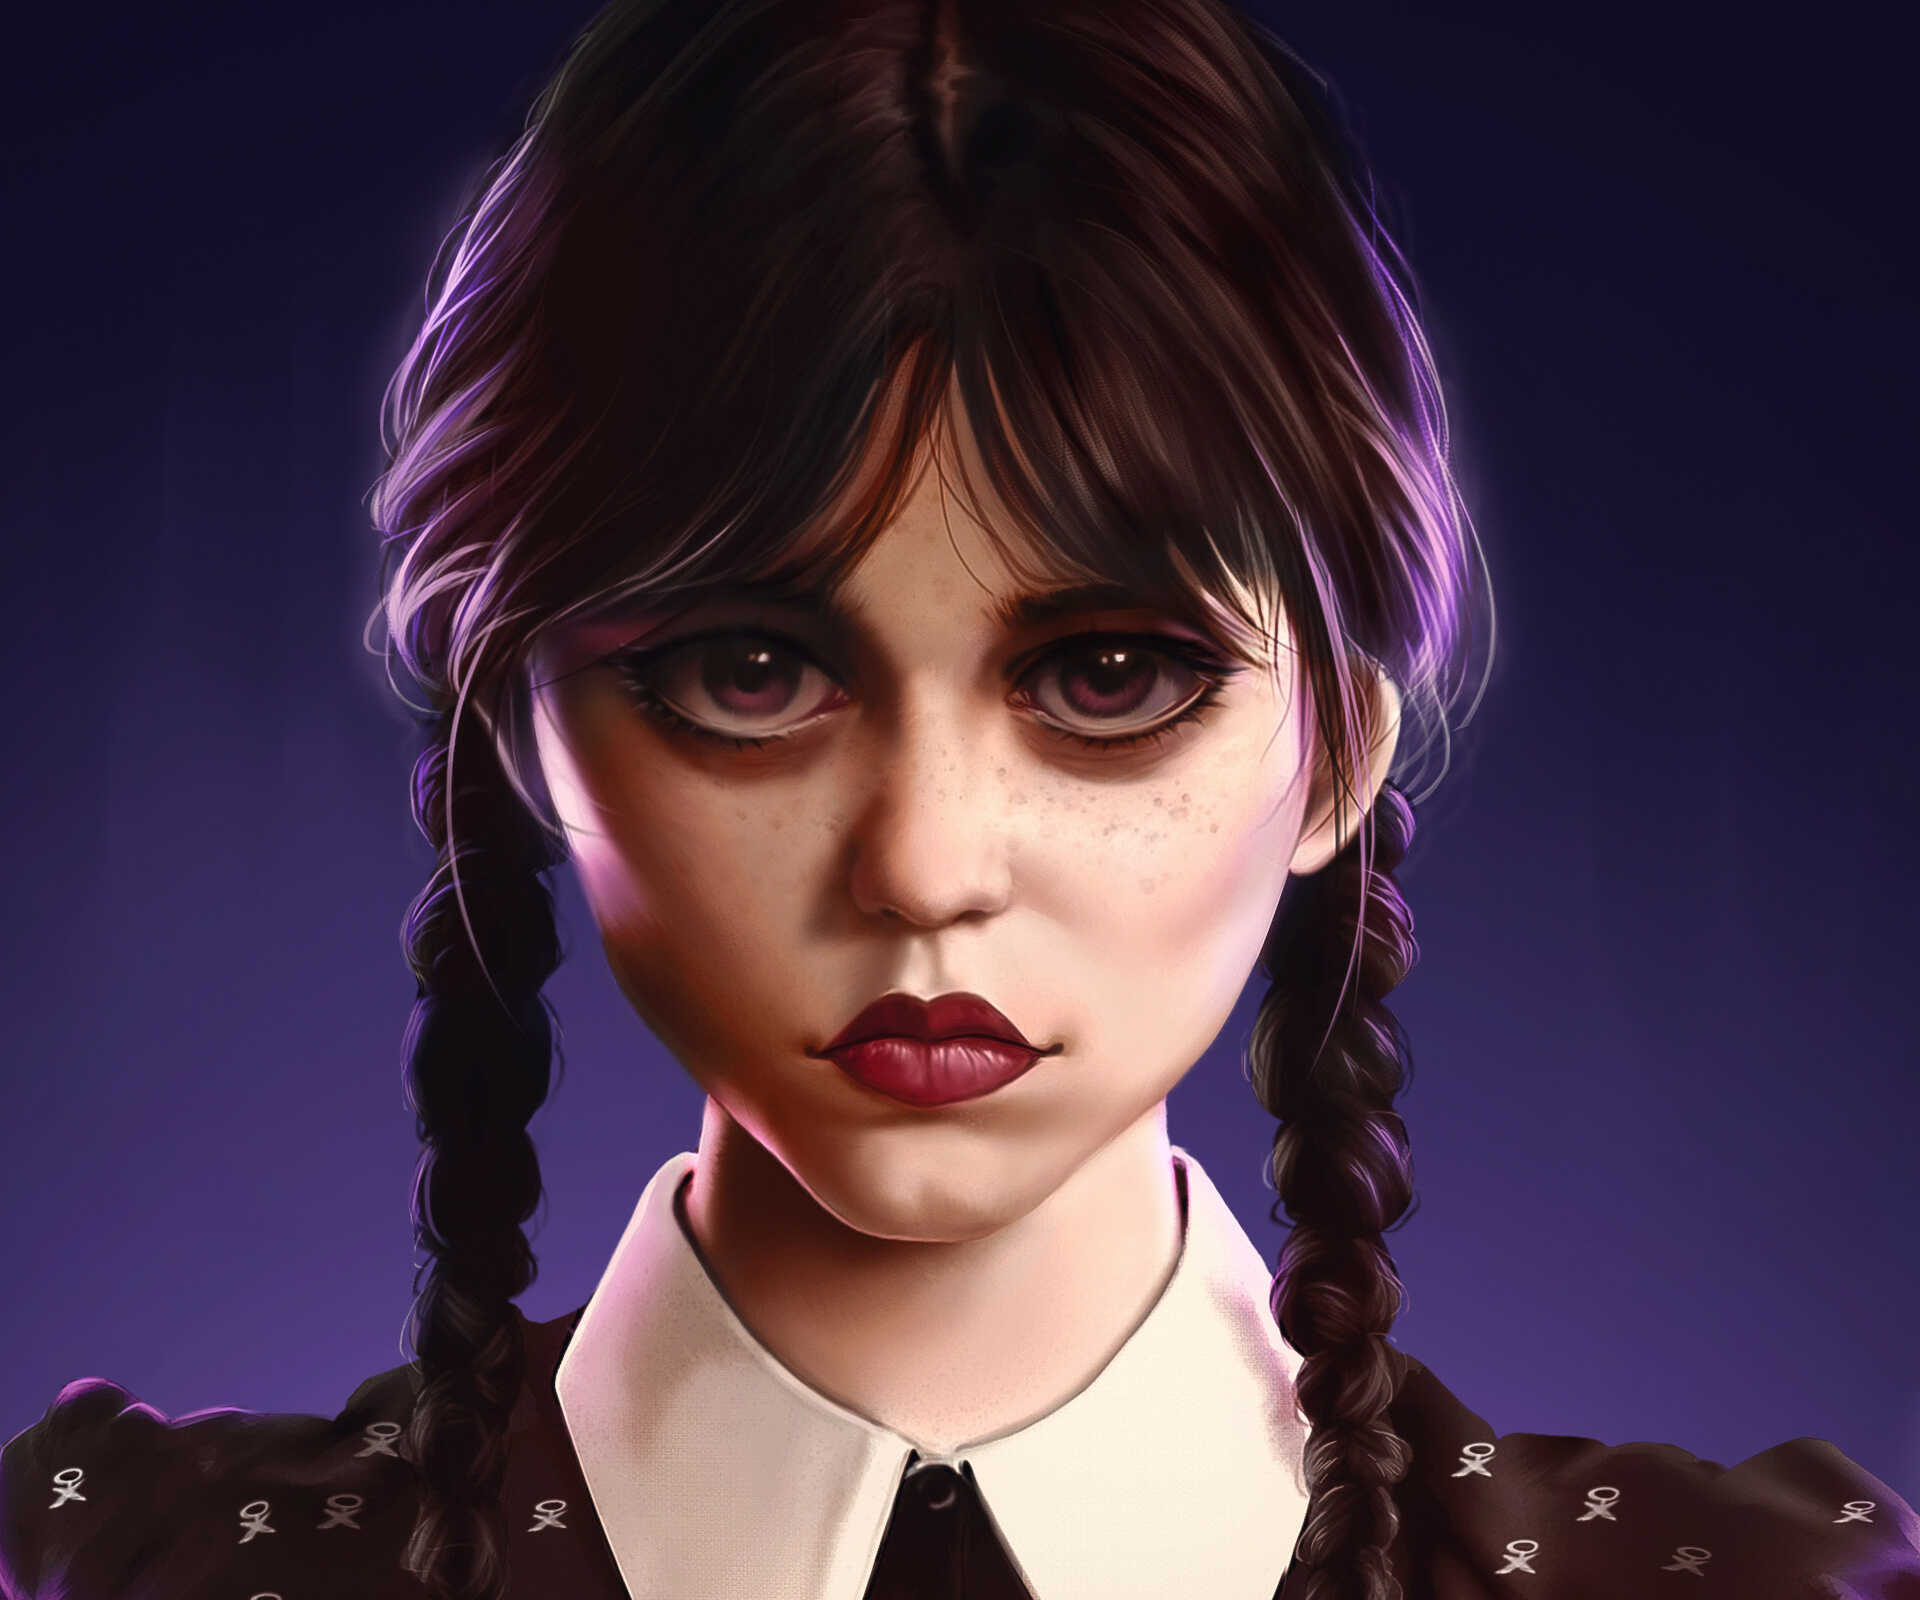 Wednesday Addams Digital Portrait Wallpaper, HD TV Series 4K Wallpapers,  Images, Photos and Background - Wallpapers Den